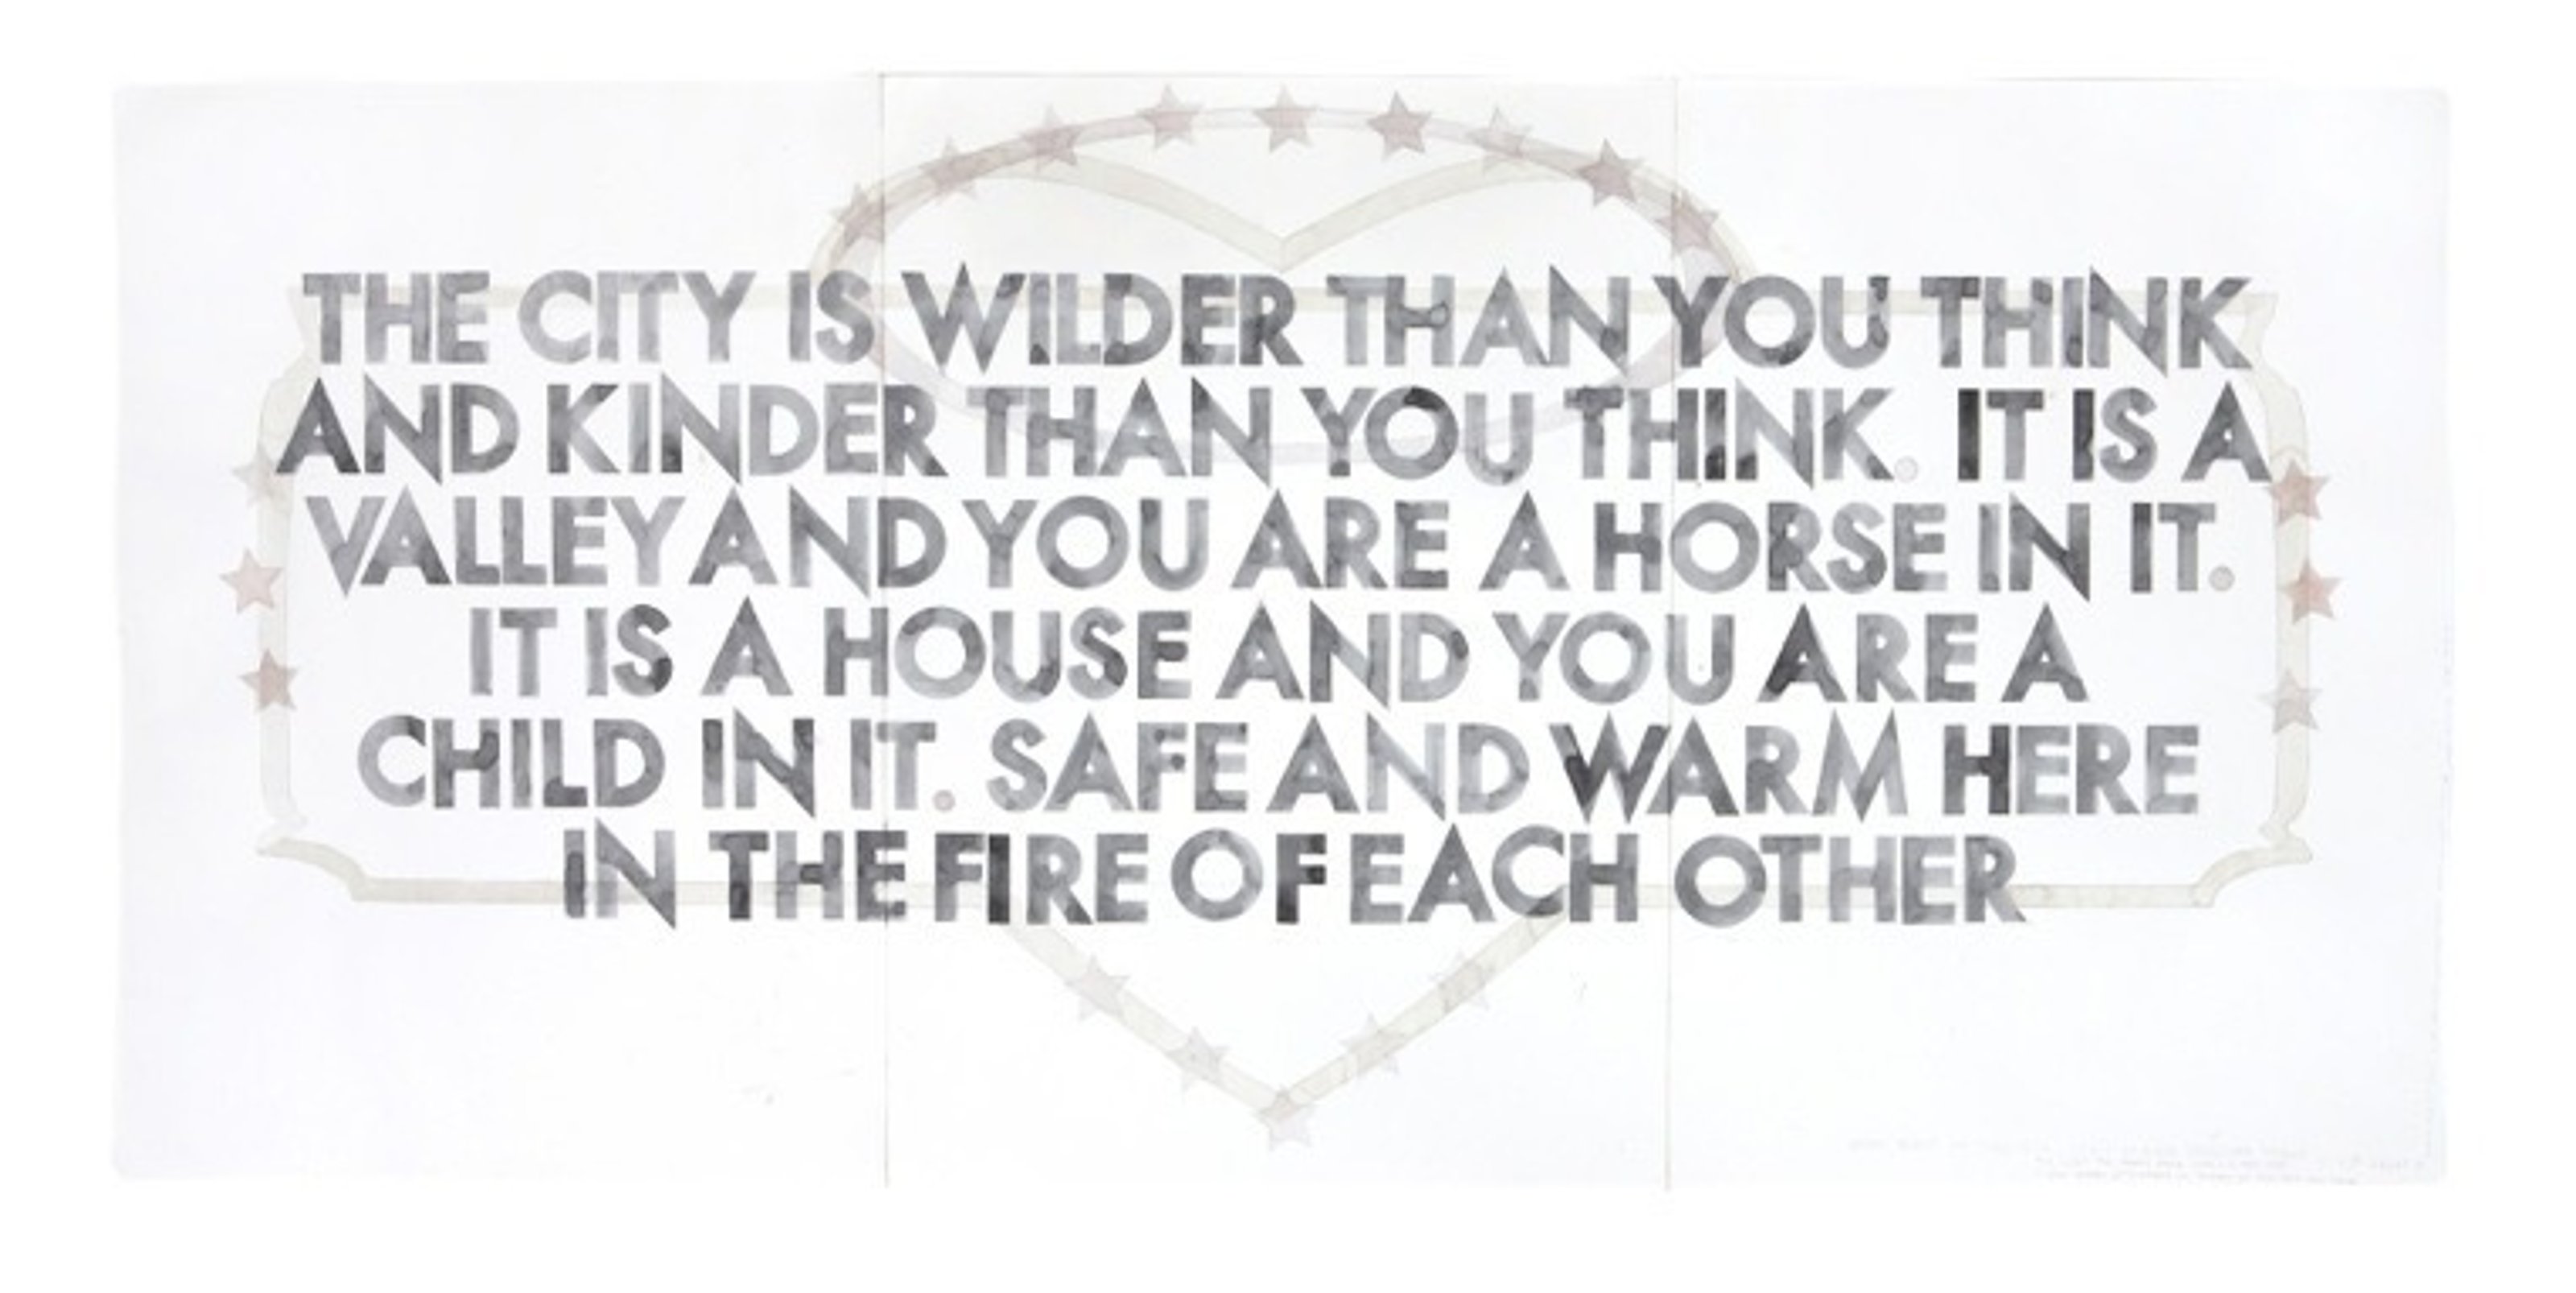 Image depicting the words The city is wilder than you think and kinder than you think. It is a valley and you are a horse in it. It is a house and you are a child in it. Safe and warm here in the fire of each other.